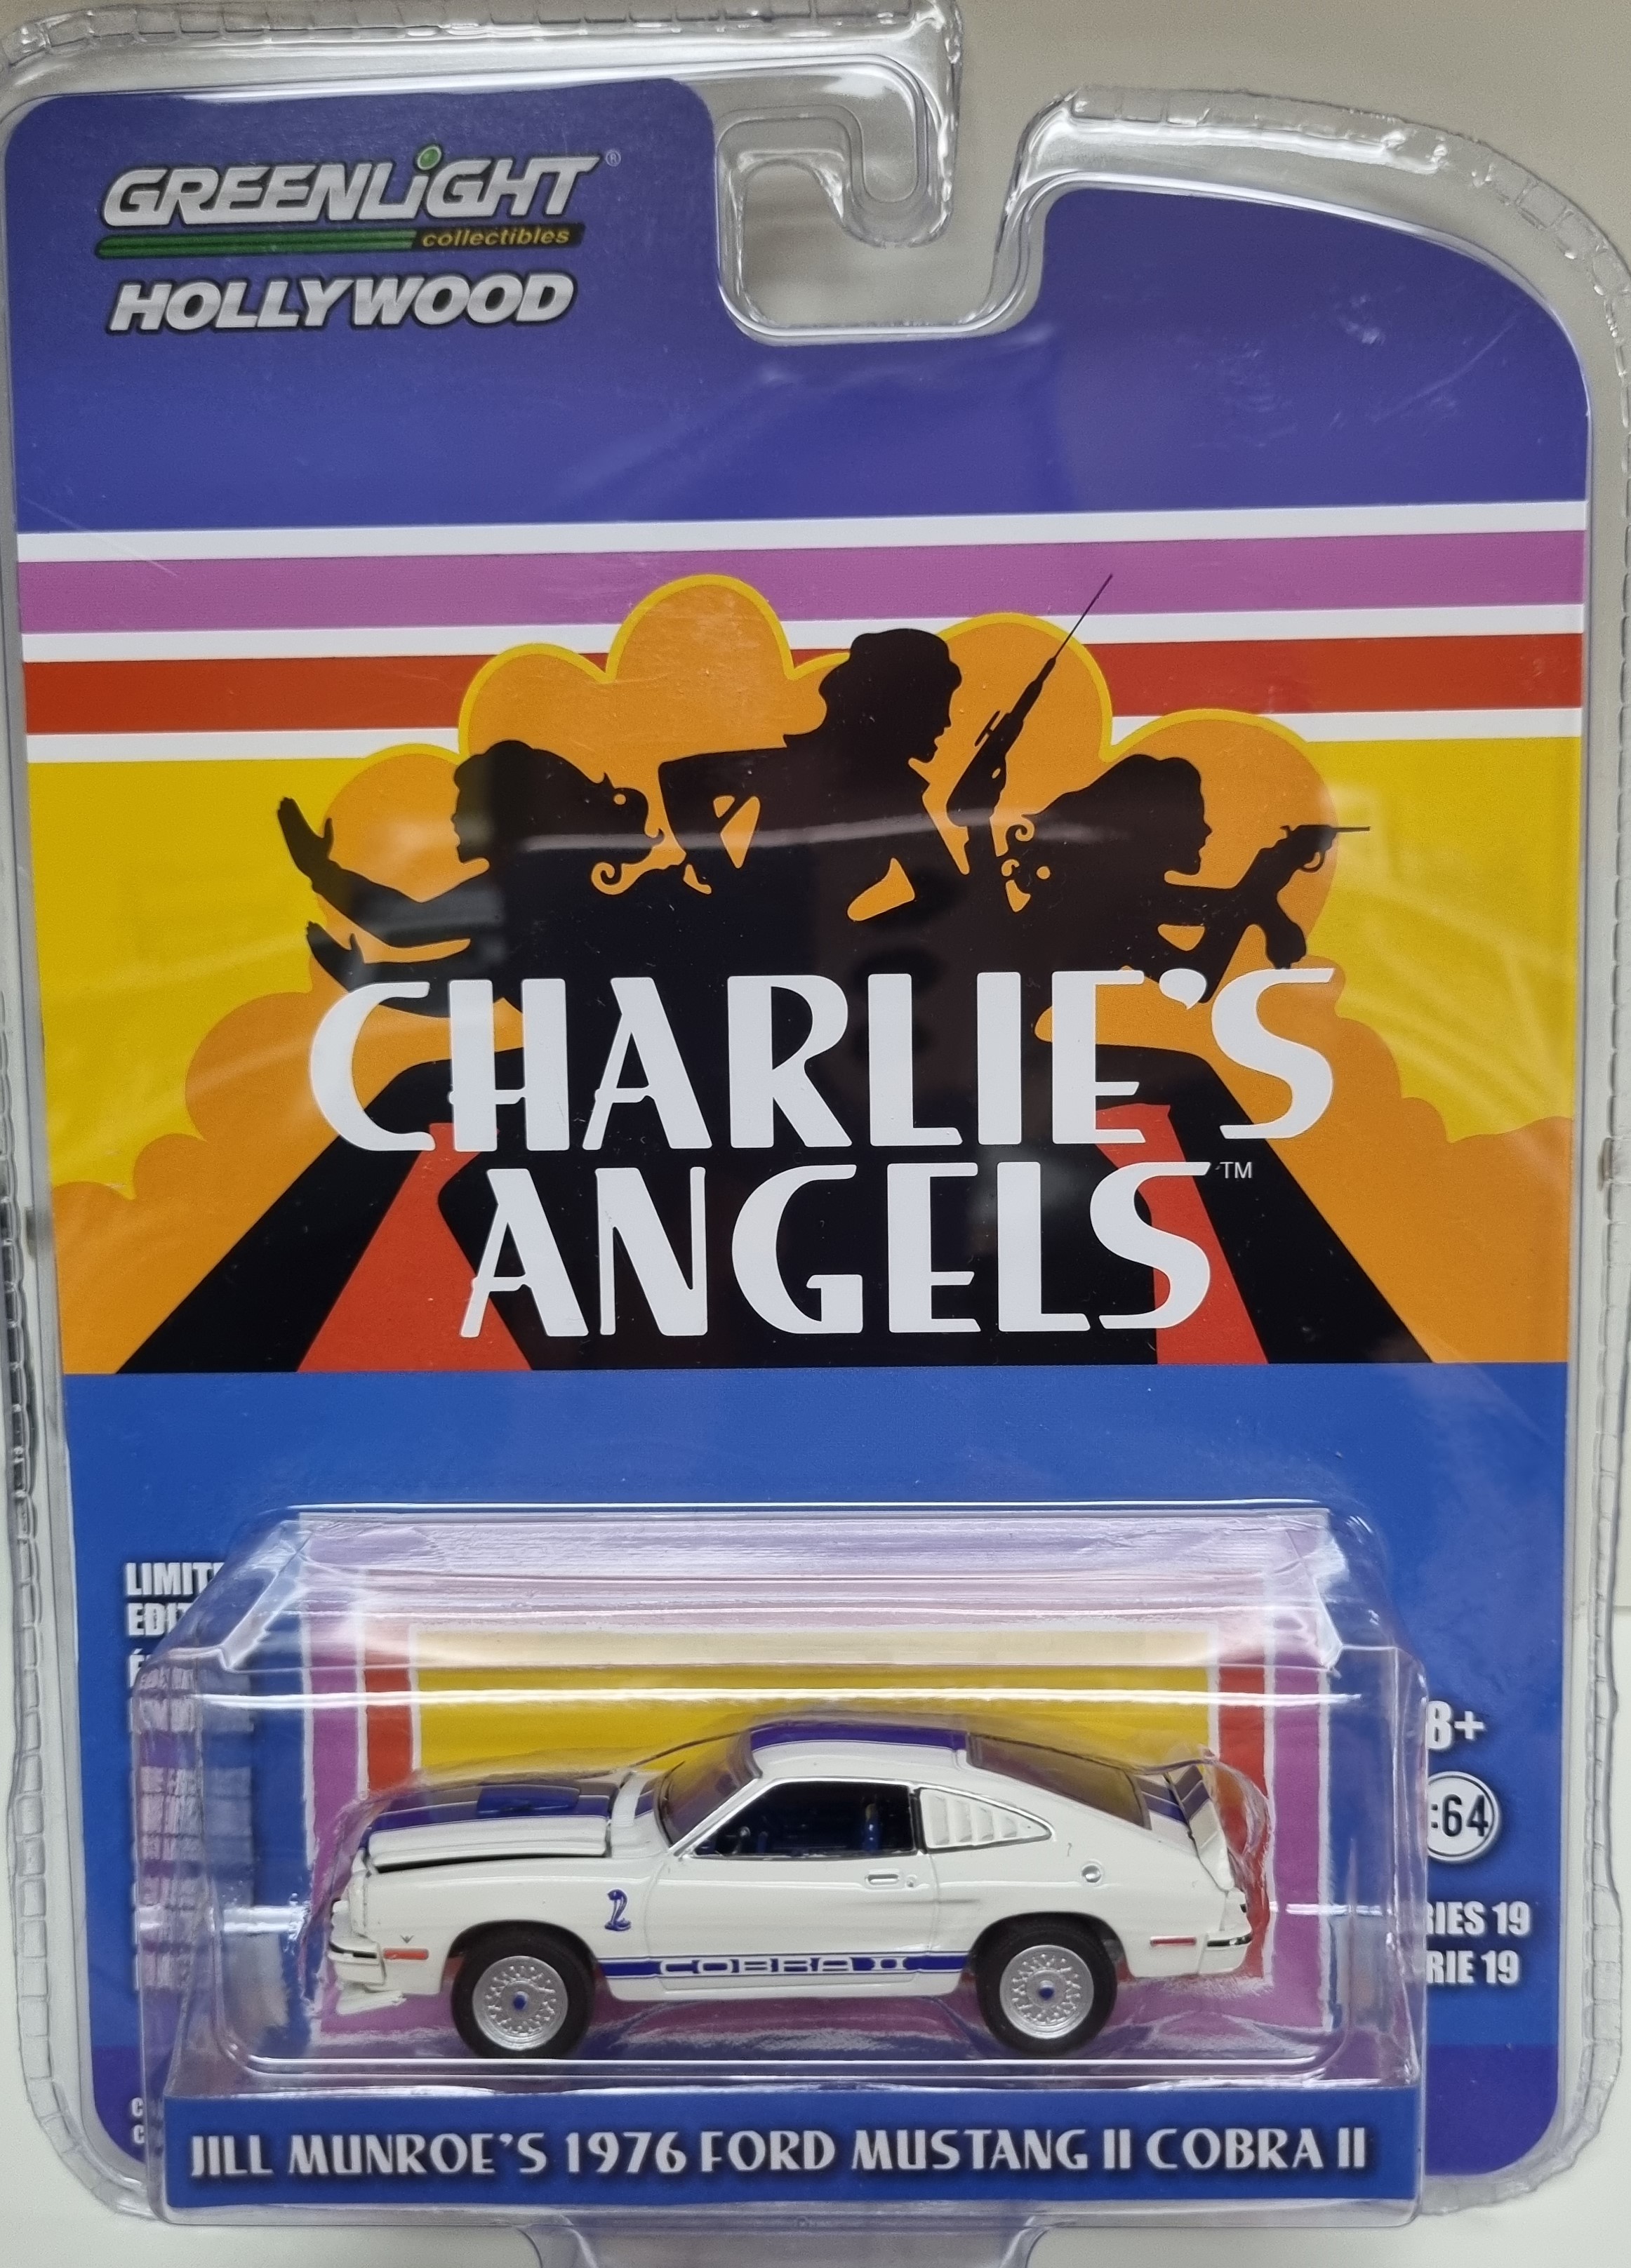 1976 Ford Mustang II Cobra TV Show Charlis's Angels 1/64 Greenlight Hollywood Series